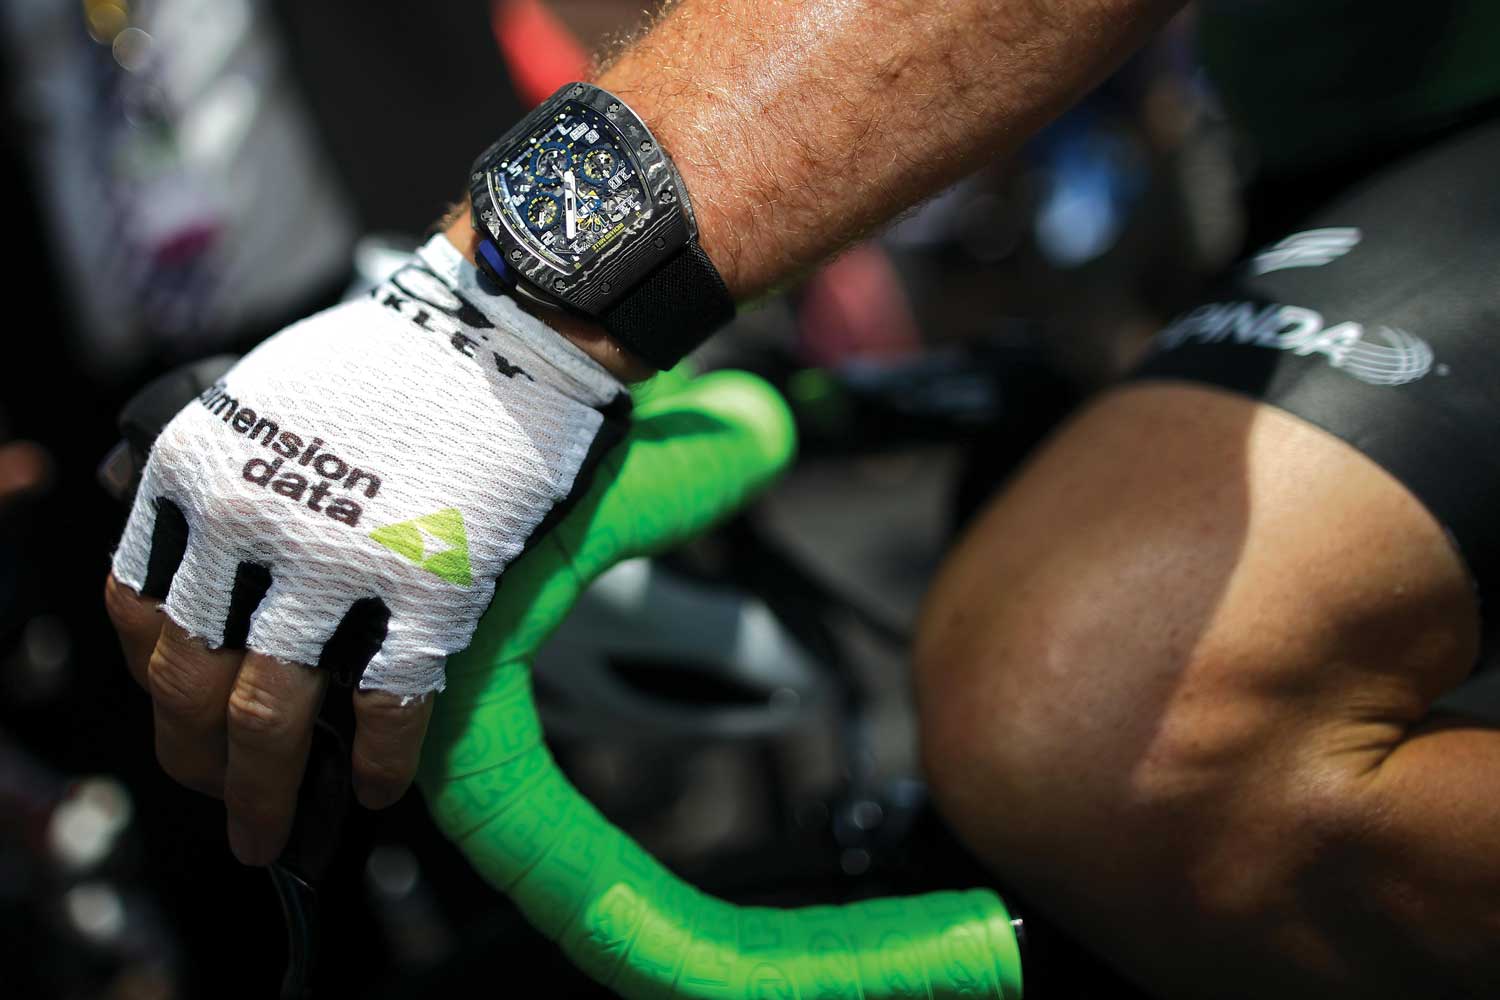 A closeup of the RM 011 on Cavendish’s wrist during his Tour de France 2016 competition